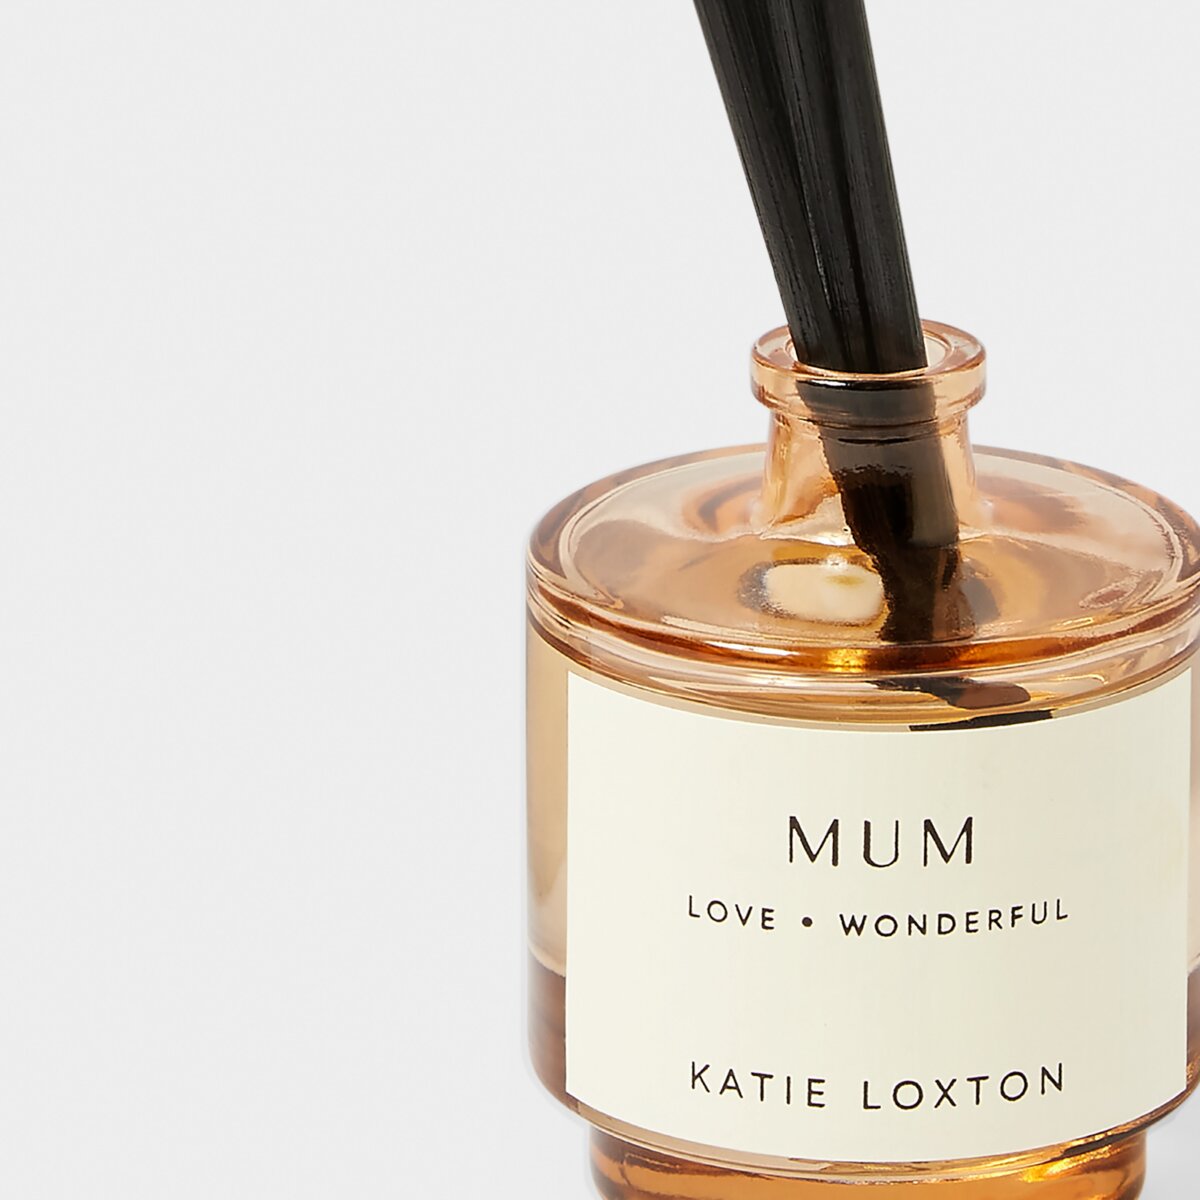 Close up shot of reed diffuser jar. Label on the jar says 'Mum', "love' and 'wonderful'